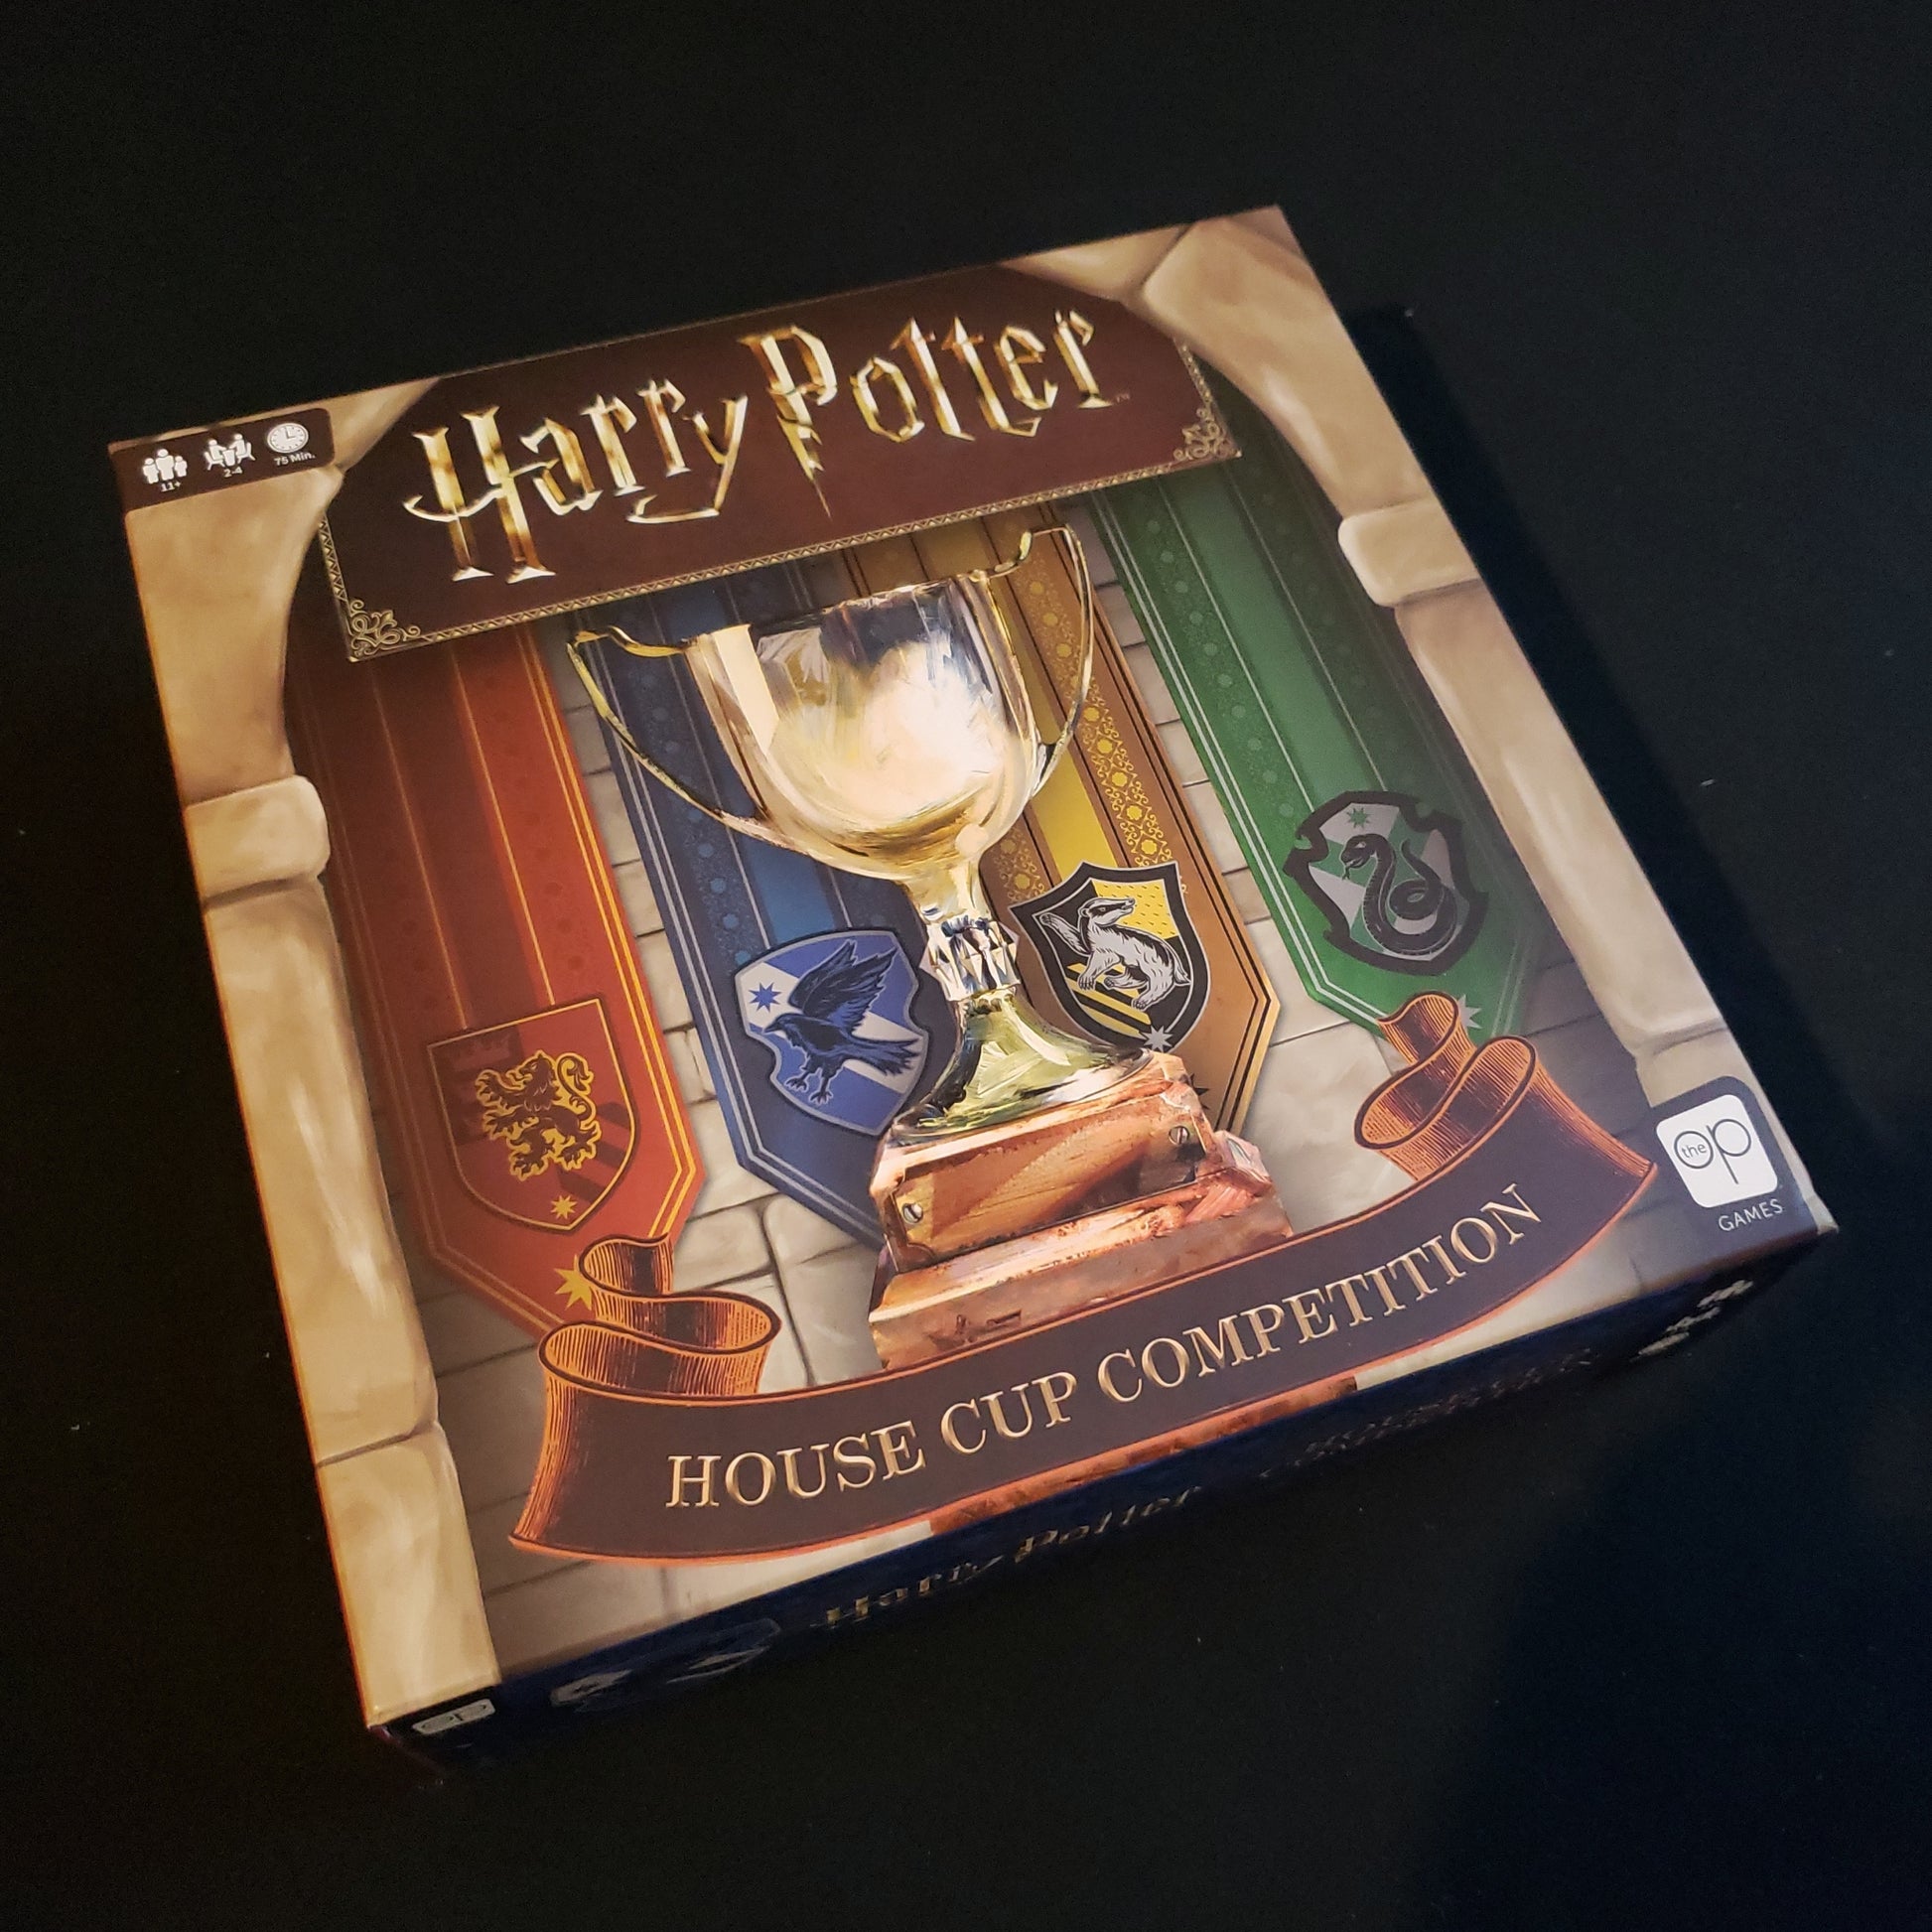 Image shows the front cover of the box of the Harry Potter: House Cup Competition board game